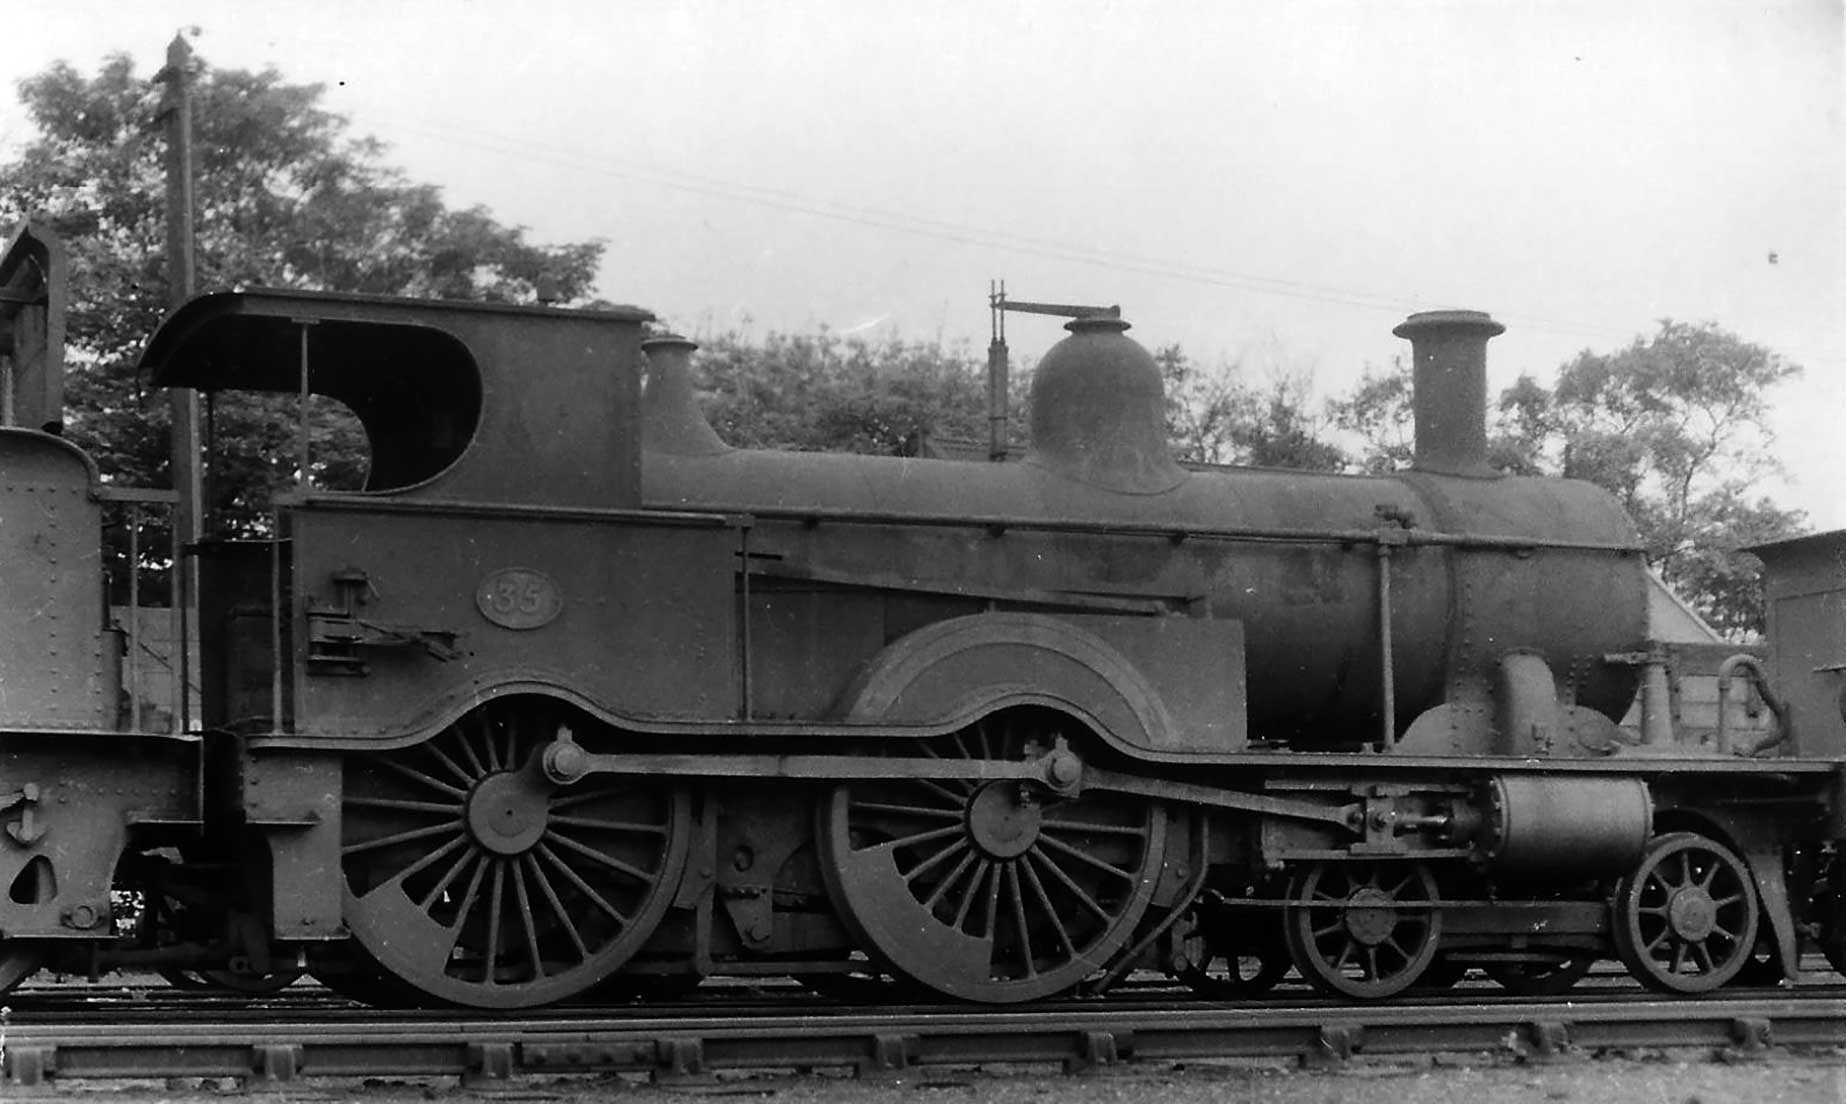 Photo showing No. 35 at Melton Constable on 1 July 1936